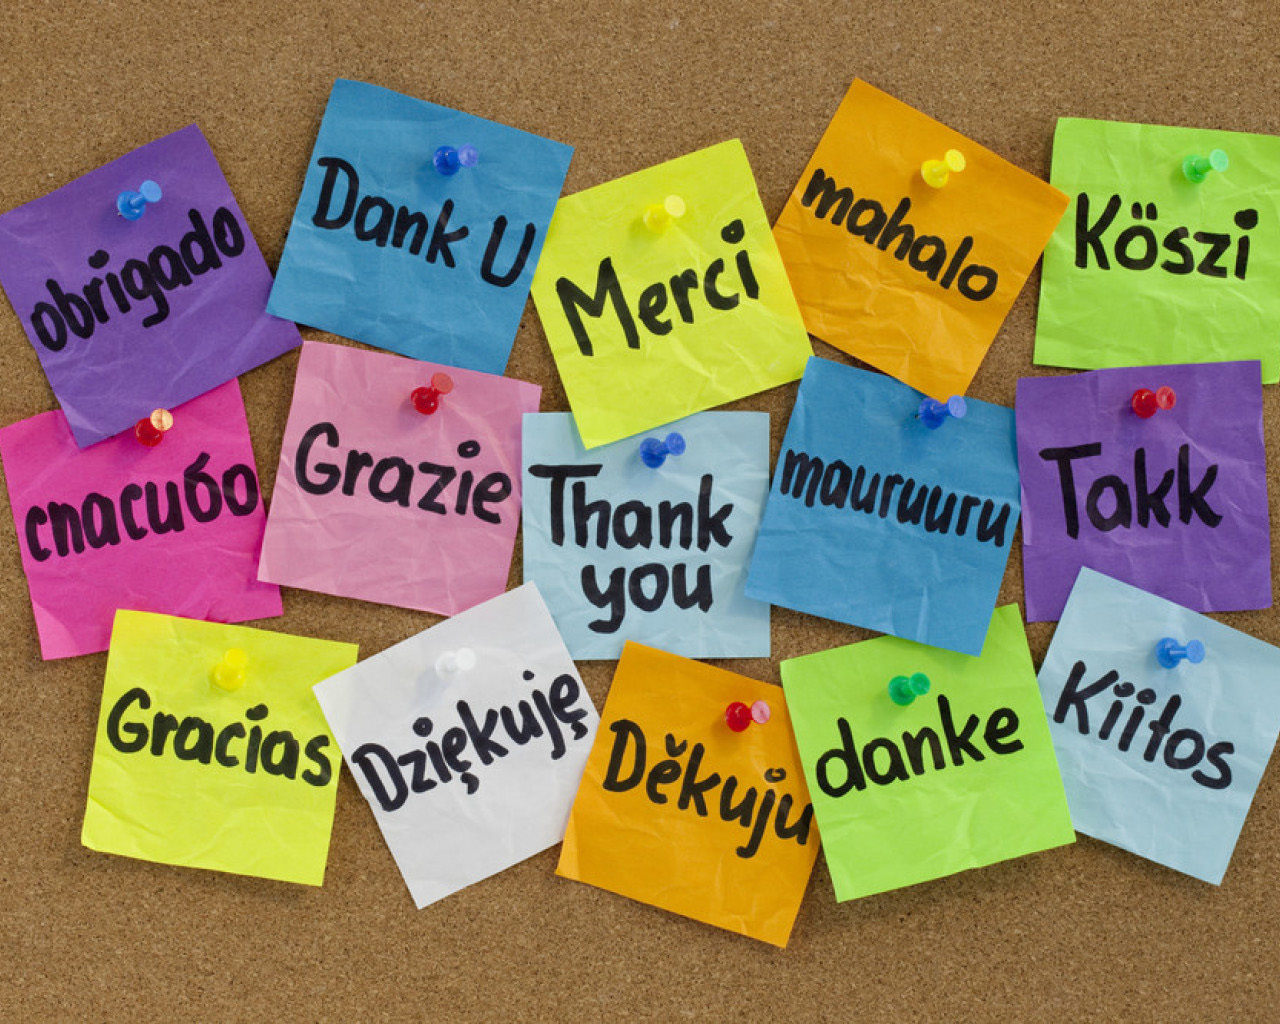 How To Say Thank You in Different Languages wallpaper 1280x1024